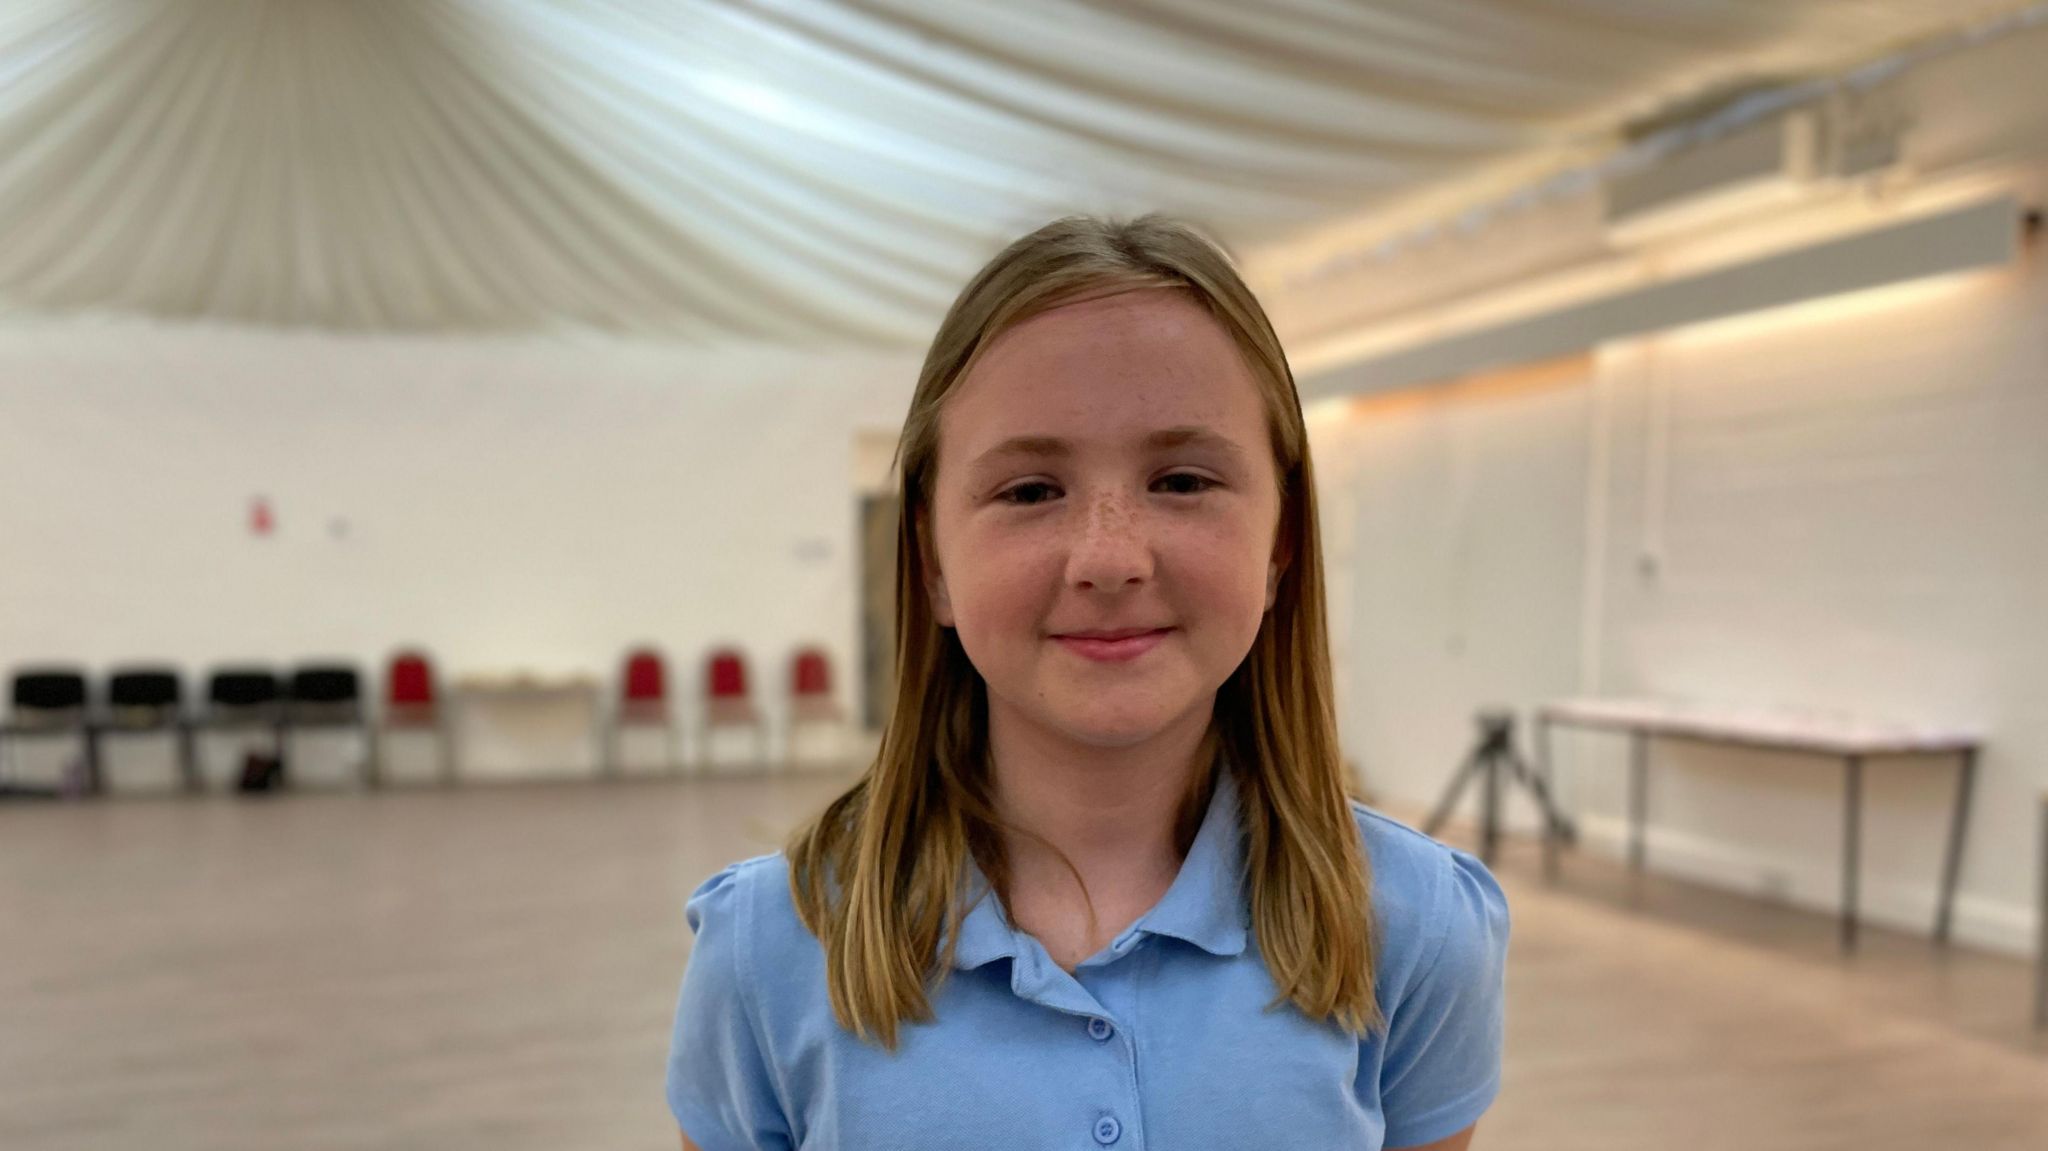 Grace in a blue polo shirt standing in a hall